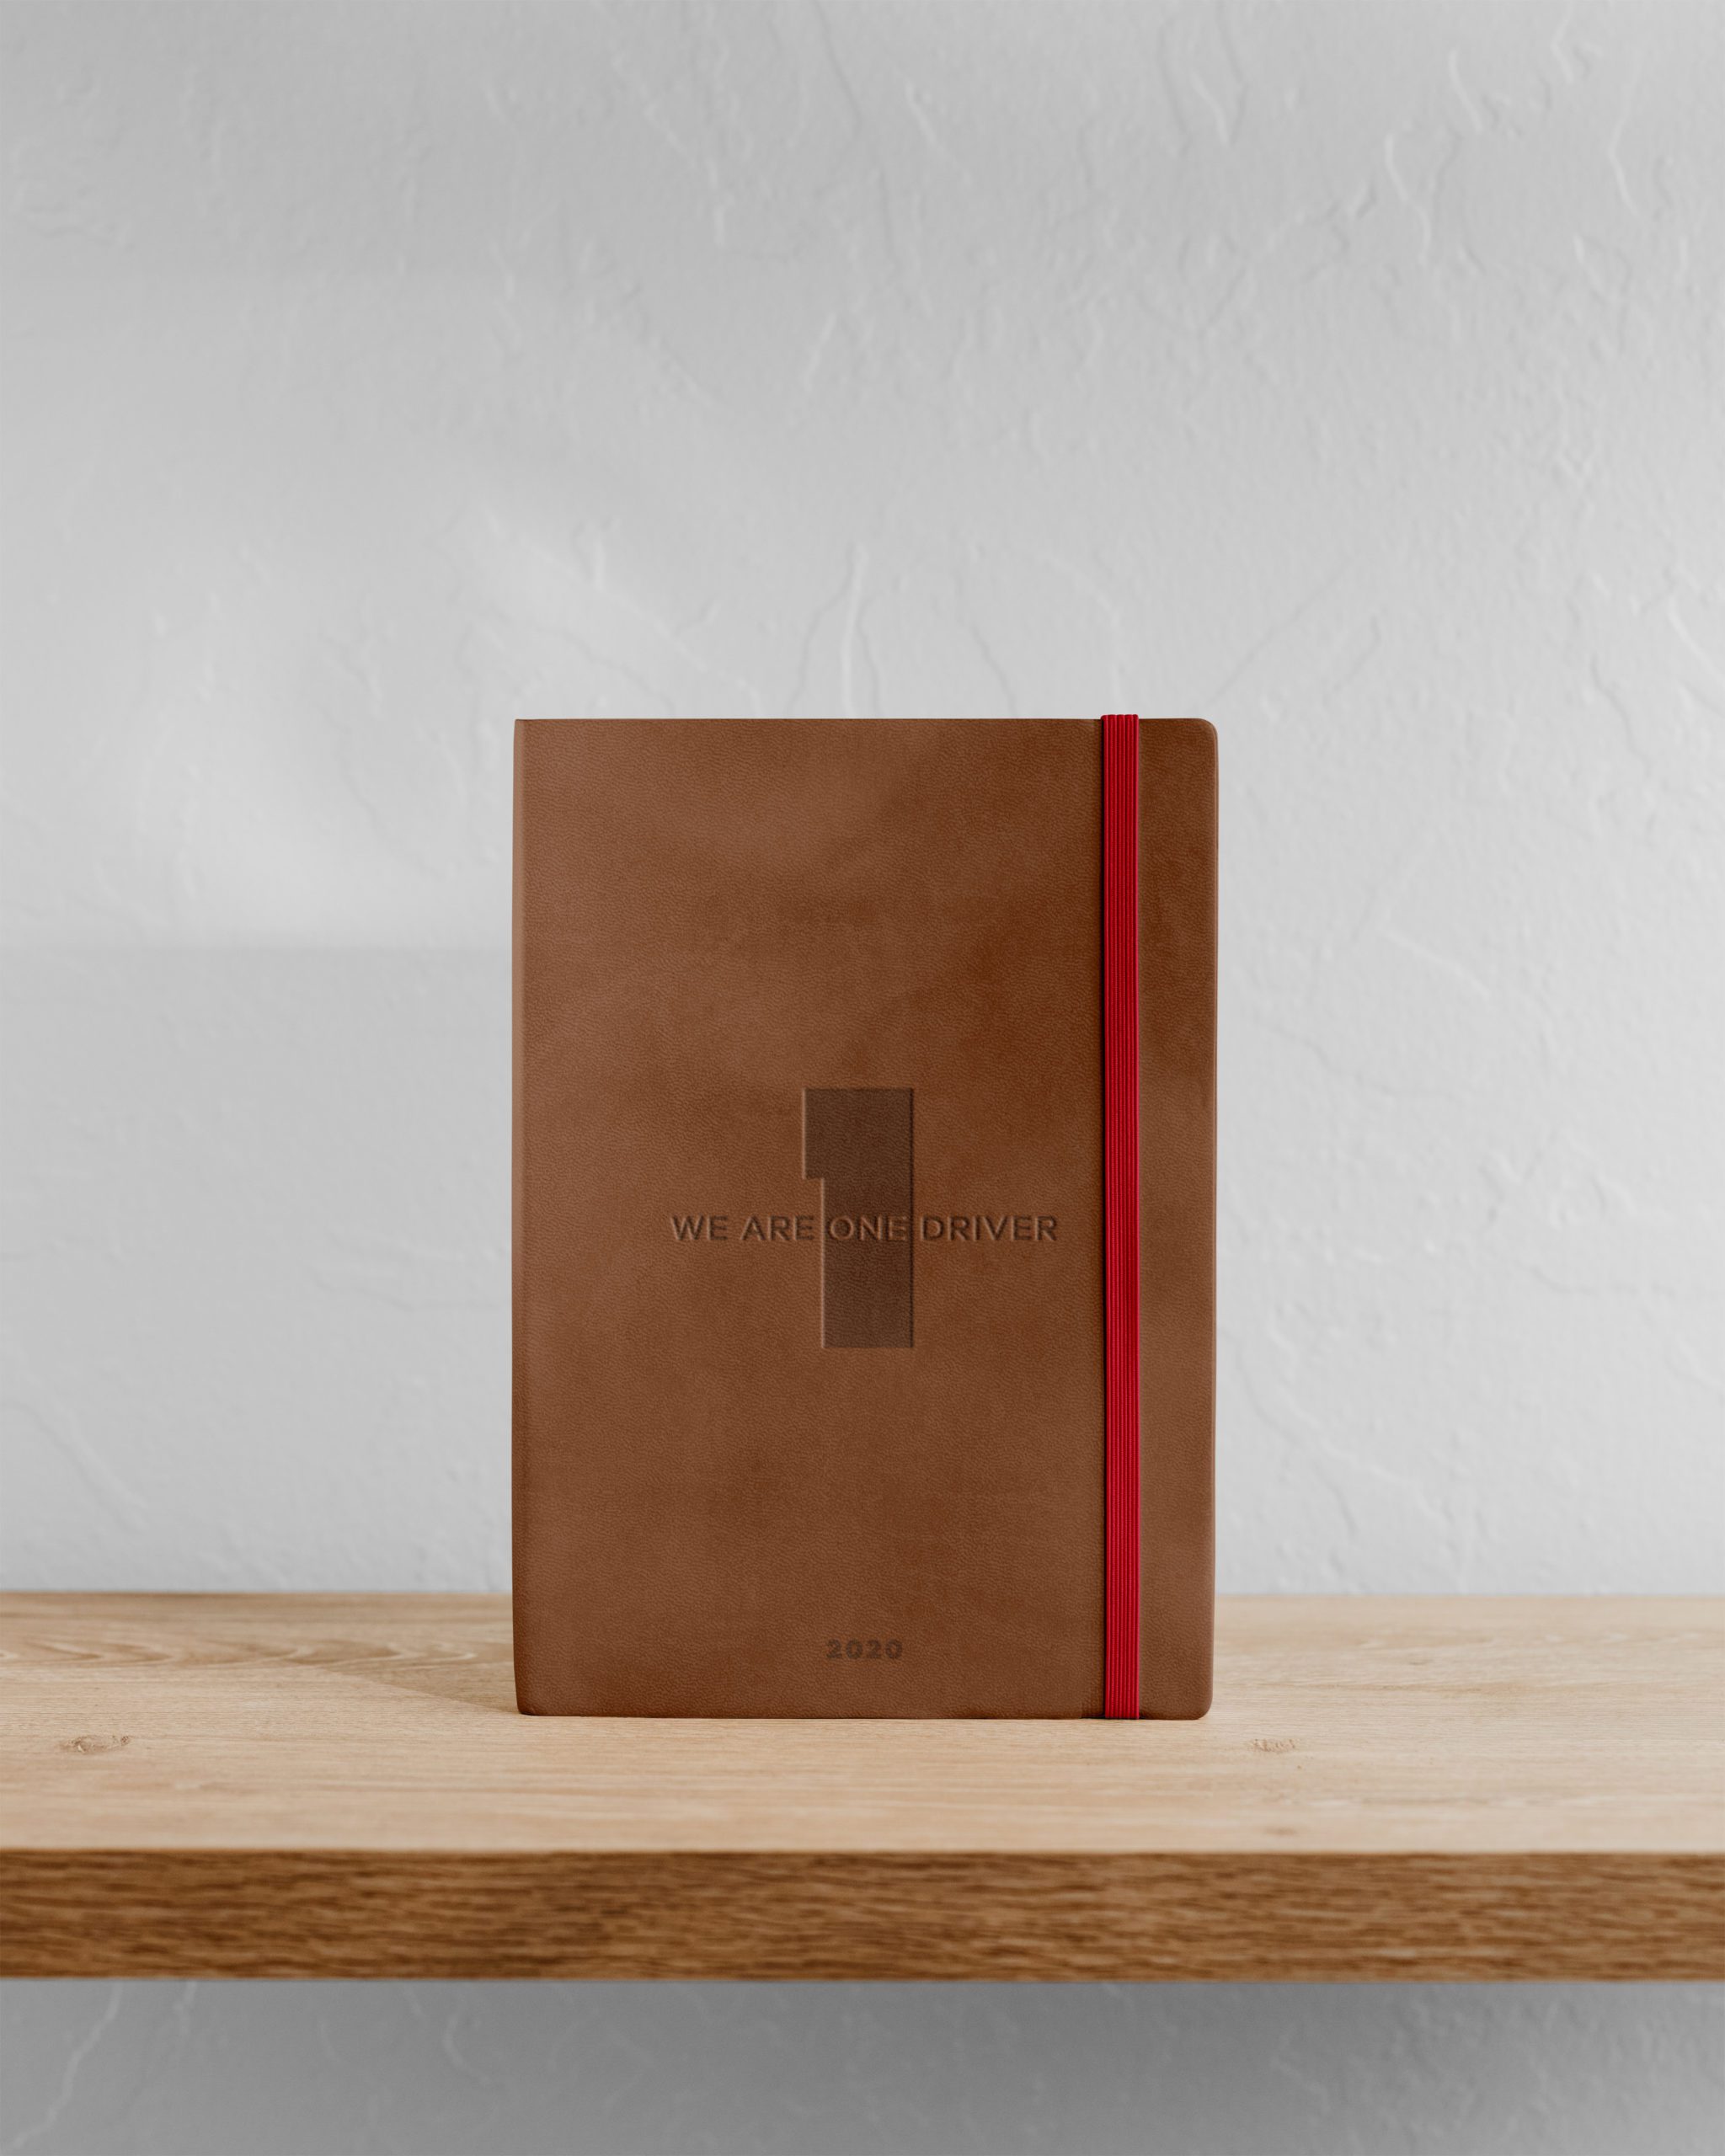 C.W. Driver One Driver 2020 Leather Notebook design